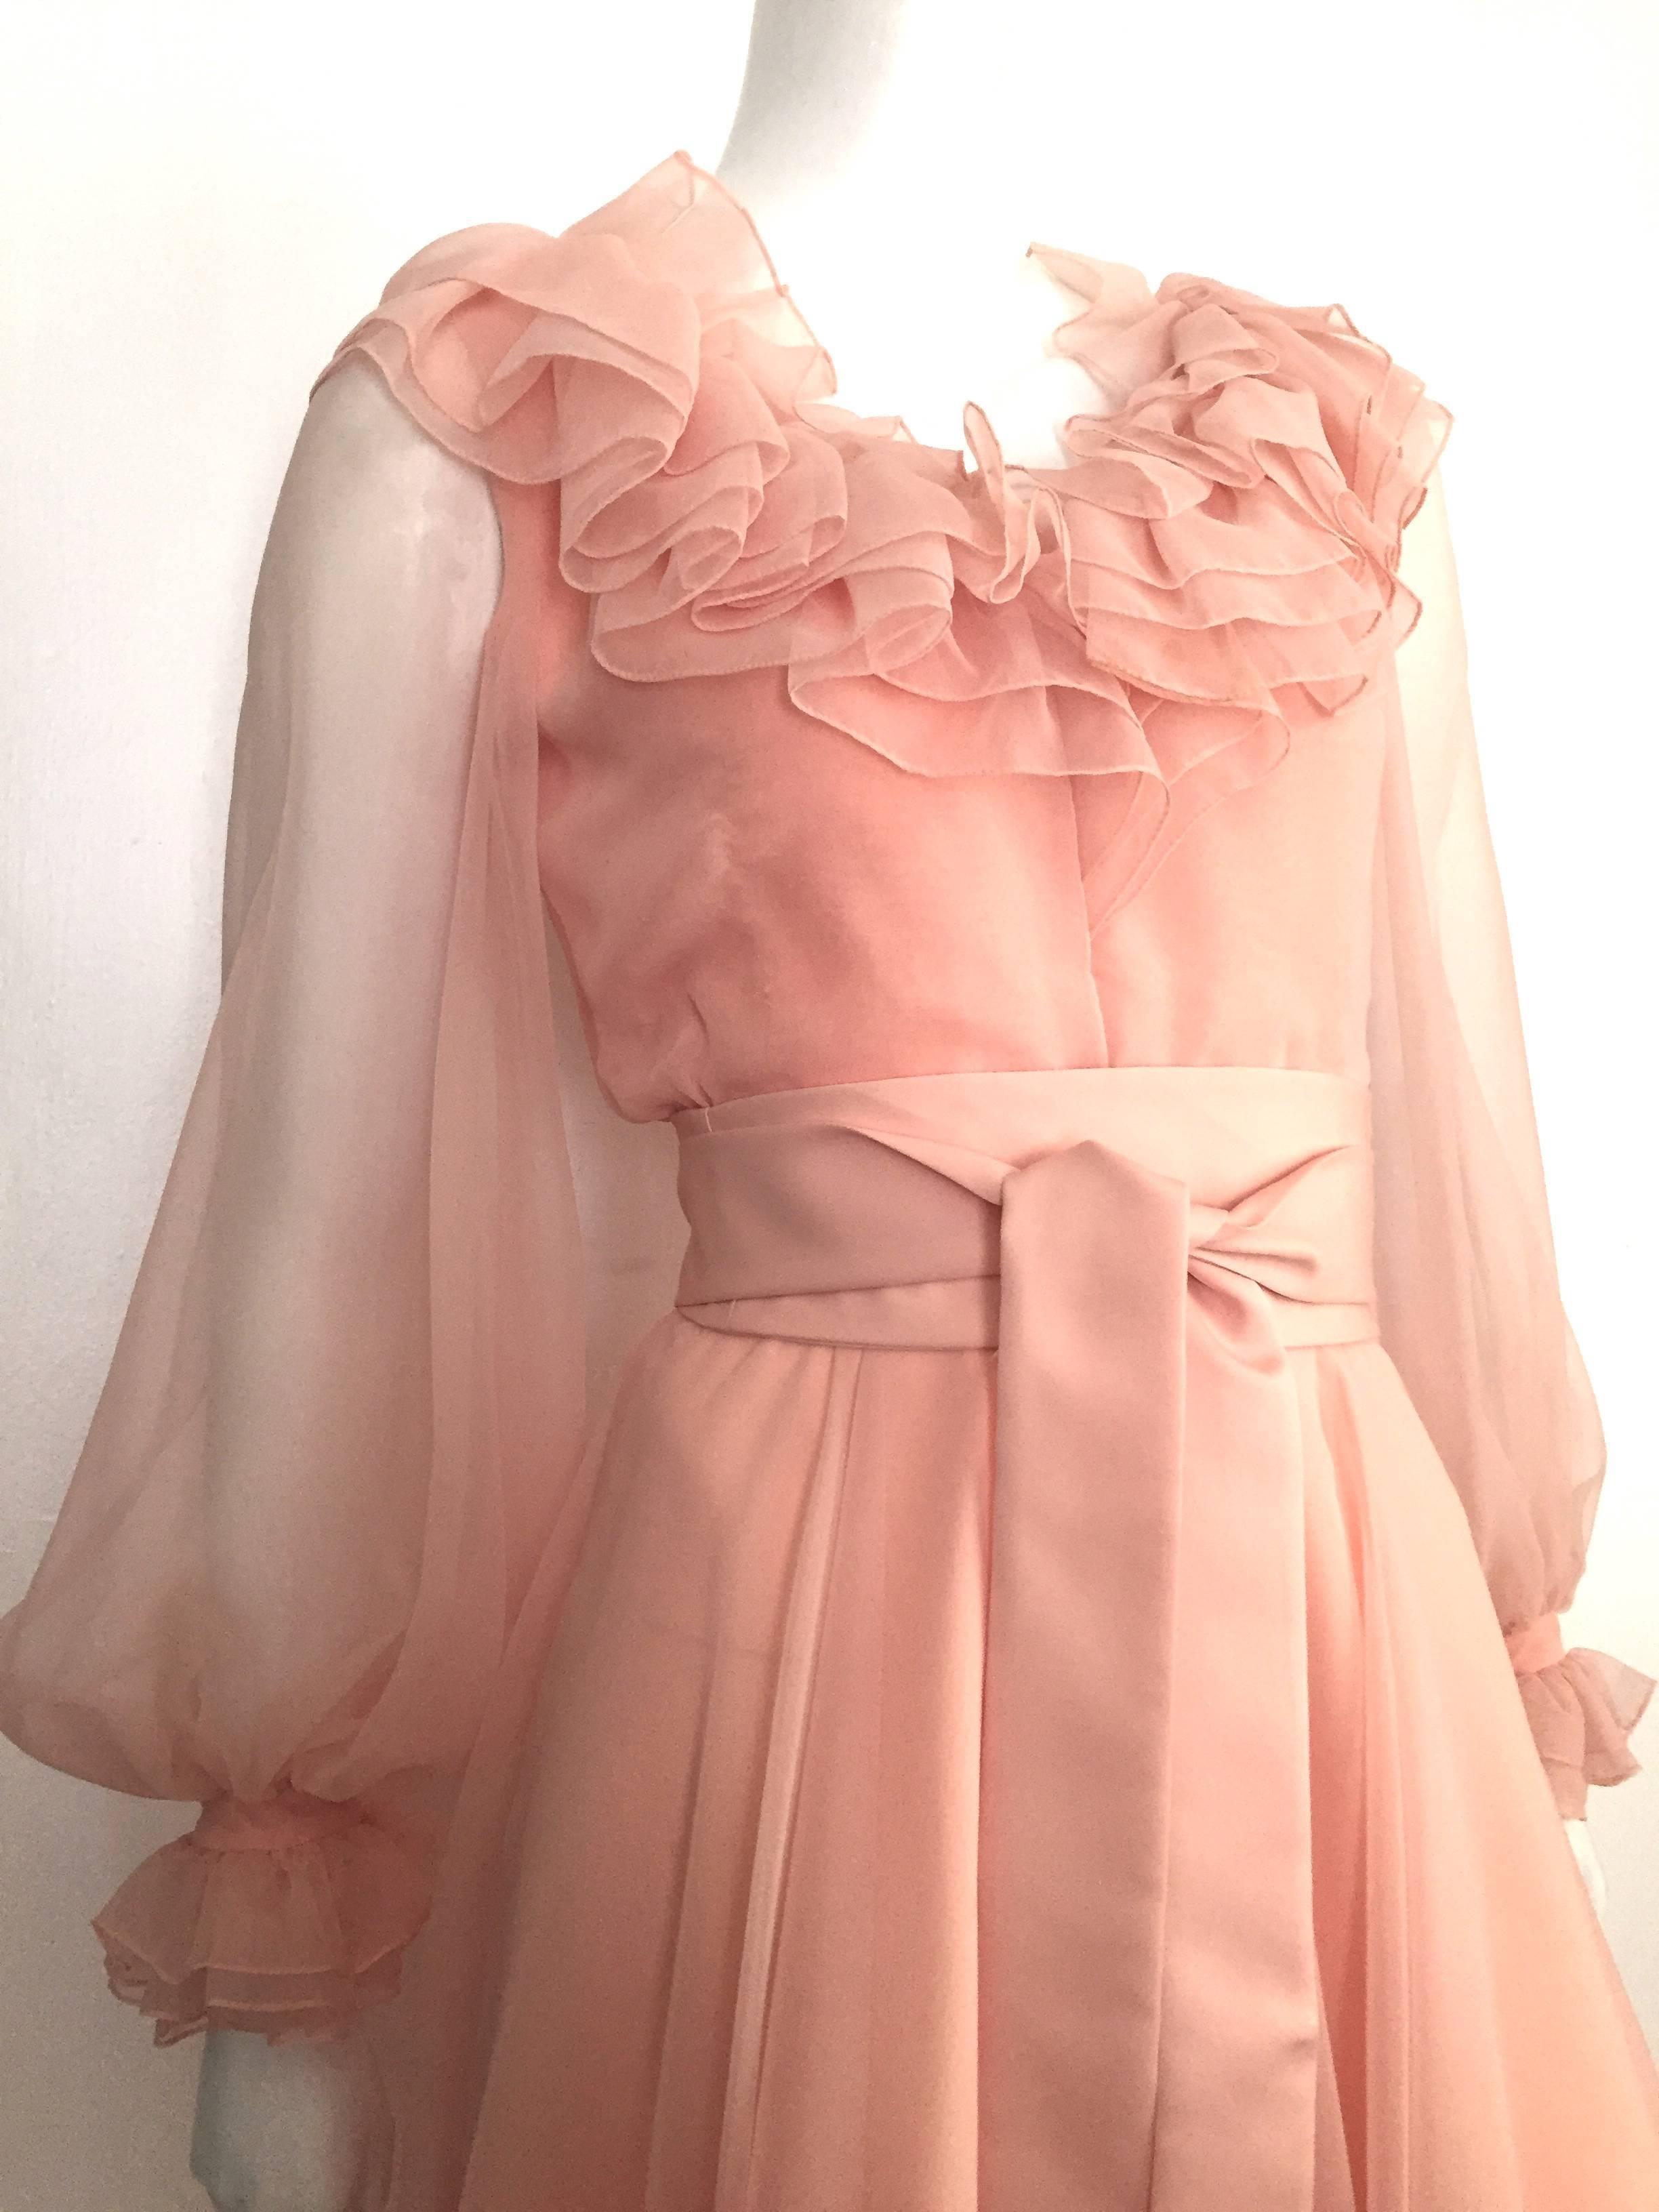 Luis Estevez 1970s peach chiffon layered cocktail dress is a size 4.  Please see & use the measurements below so you can properly measure your lovely body.
Layered ruffled collar and sheer ballooning sleeves adds that elegant touch to this timeless